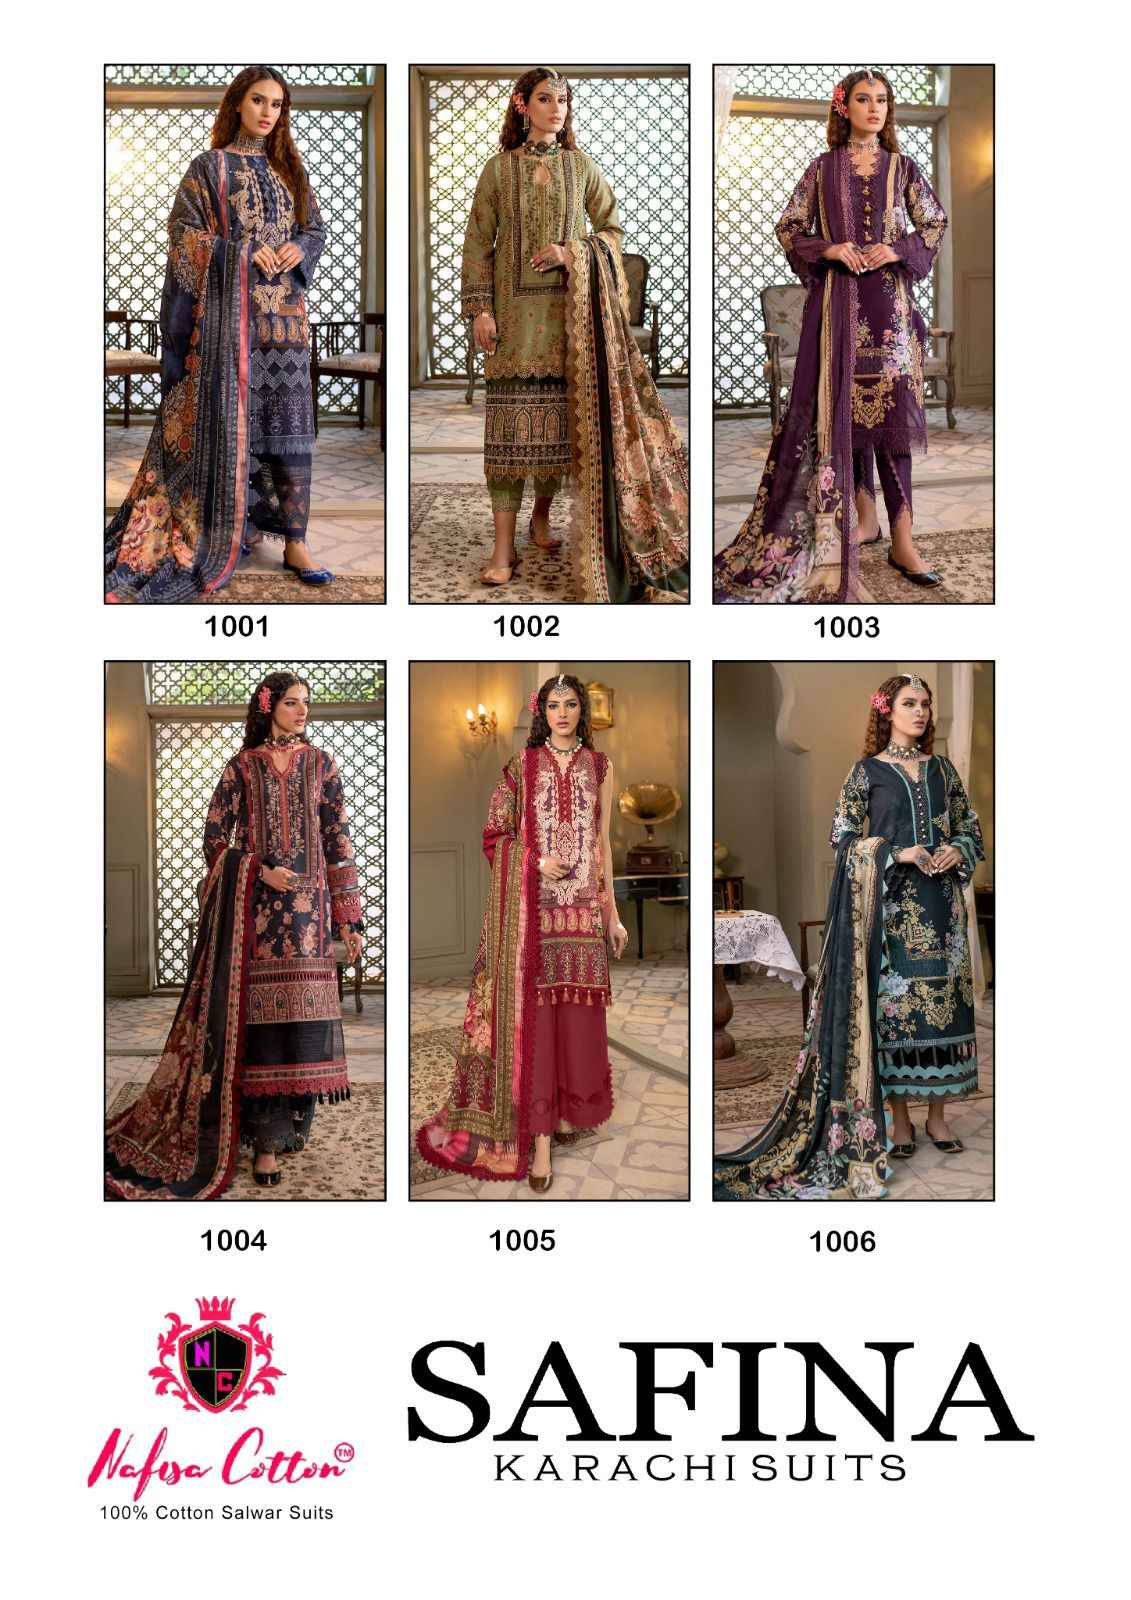 buy Faiza Vol 7 by Nafisa Cotton from ahmed creation,pakistani suit online  wholesale retail in surat,India,100% original guranteedfrom ahmed  creation,pakistani suit online wholesale retail in surat,India,100%  original guranteedfrom ahmed creation ...